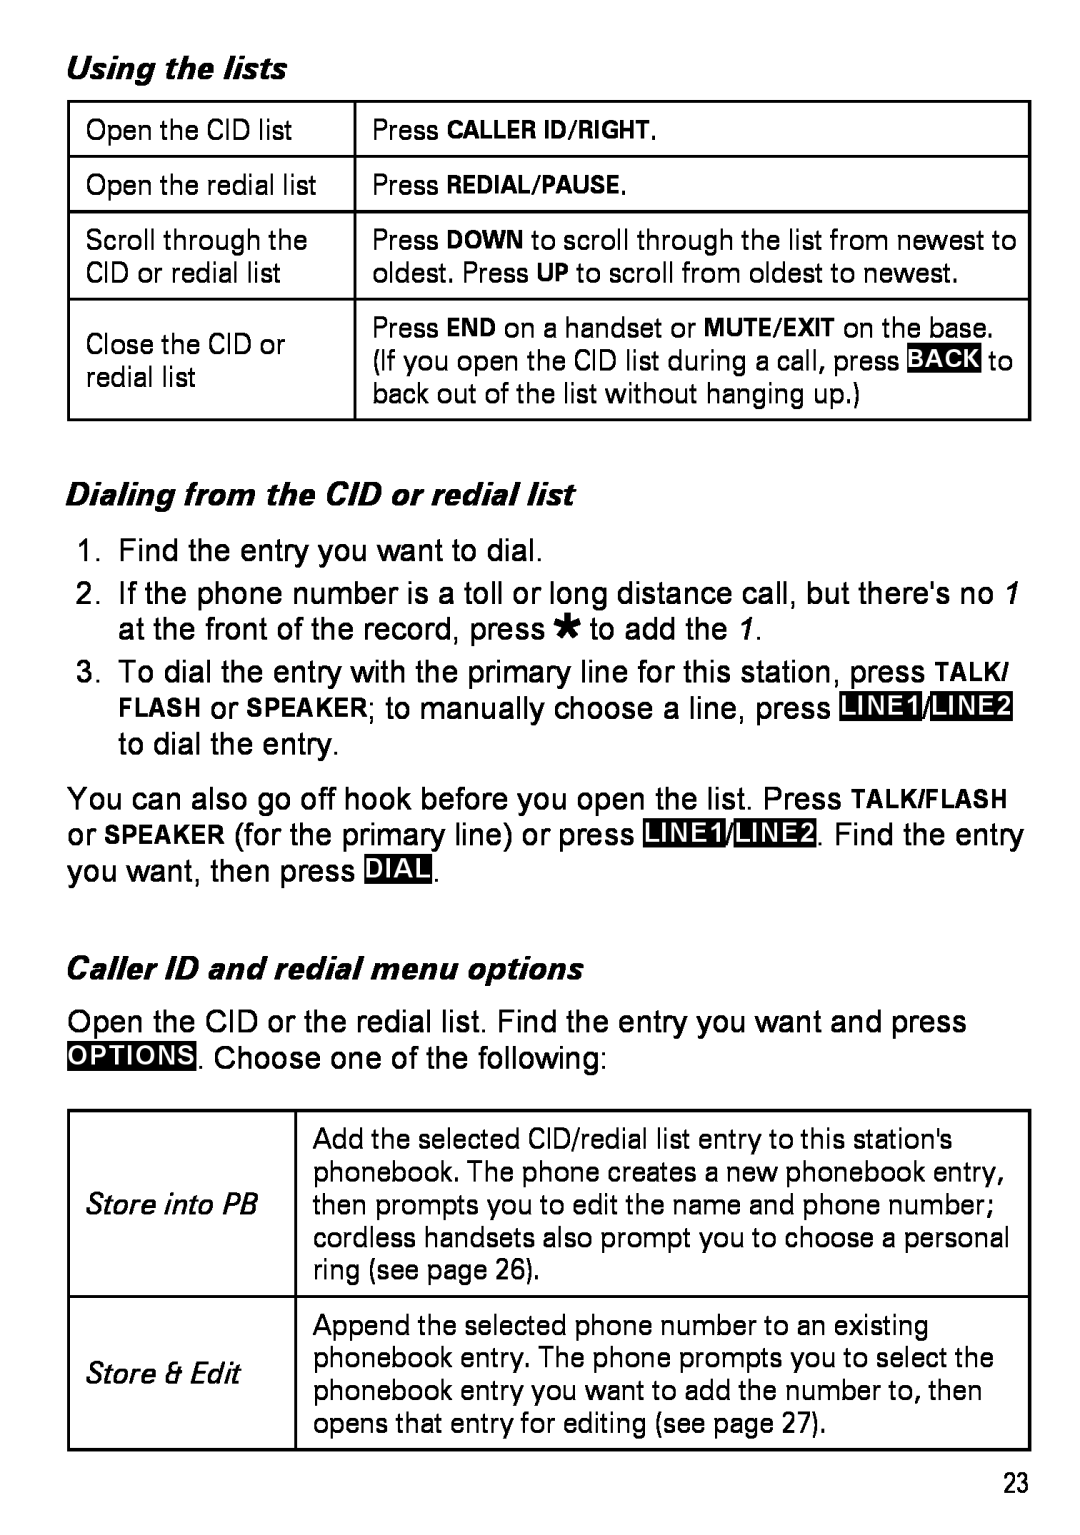 Uniden DECT4086-4, DECT4086-2 manual Using the lists, Dialing from the CID or redial list, Caller ID and redial menu options 